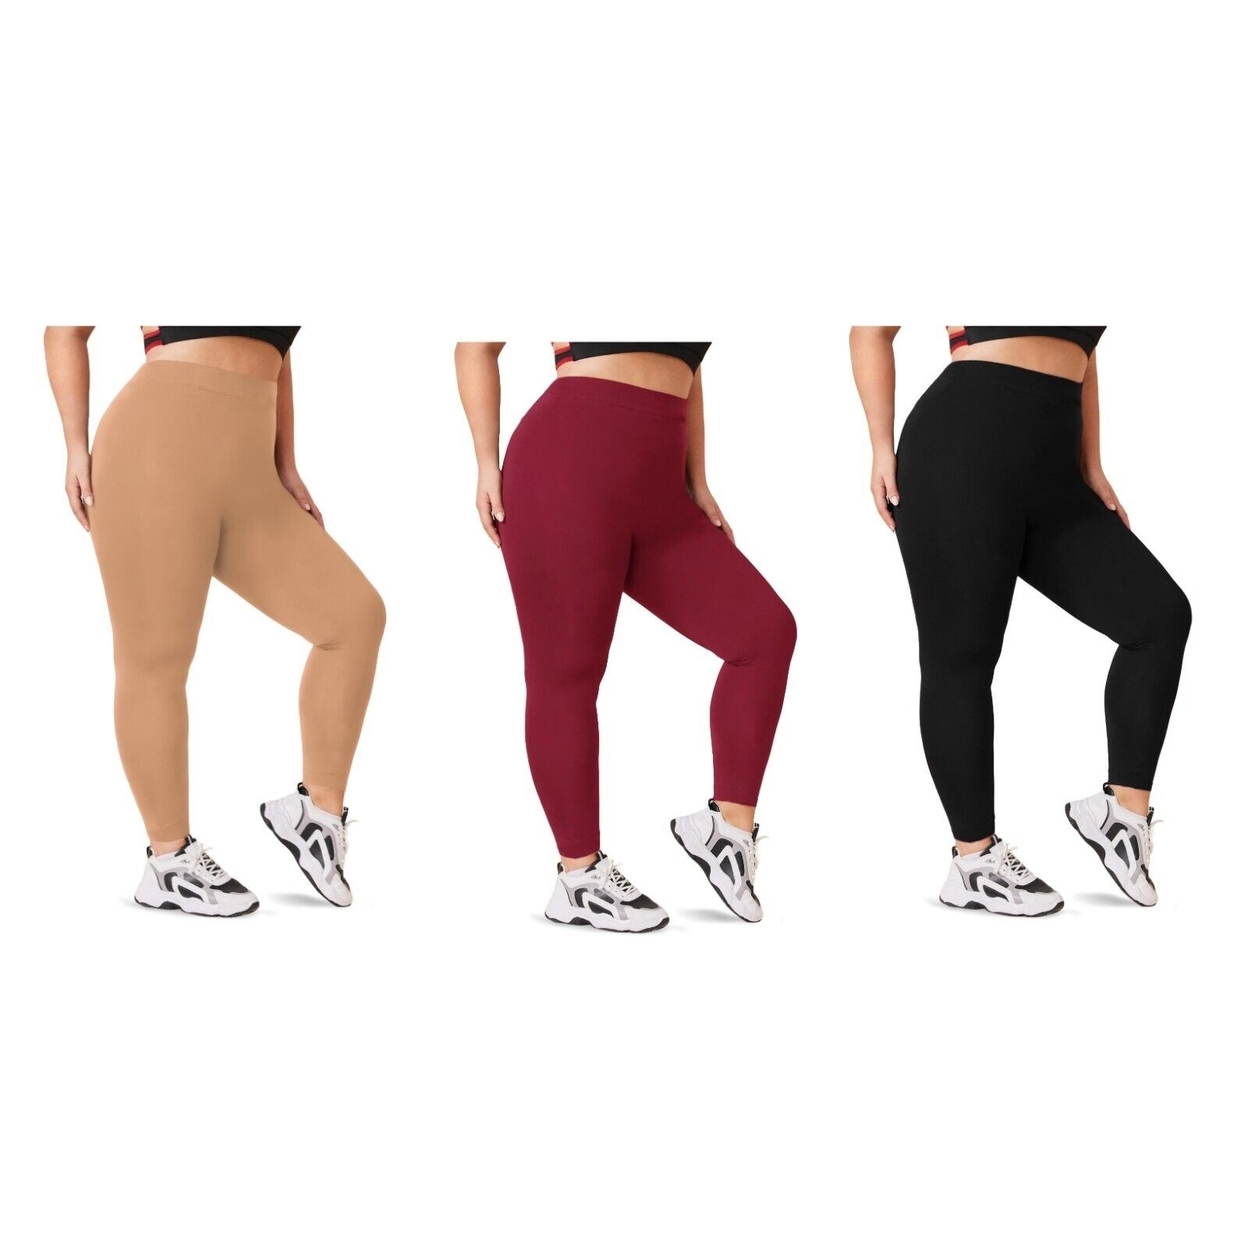 2-Pack: Women's Casual Ultra-Soft Smooth High Waisted Athletic Active Yoga Leggings Plus Size Available - Beige & Beige, 1x